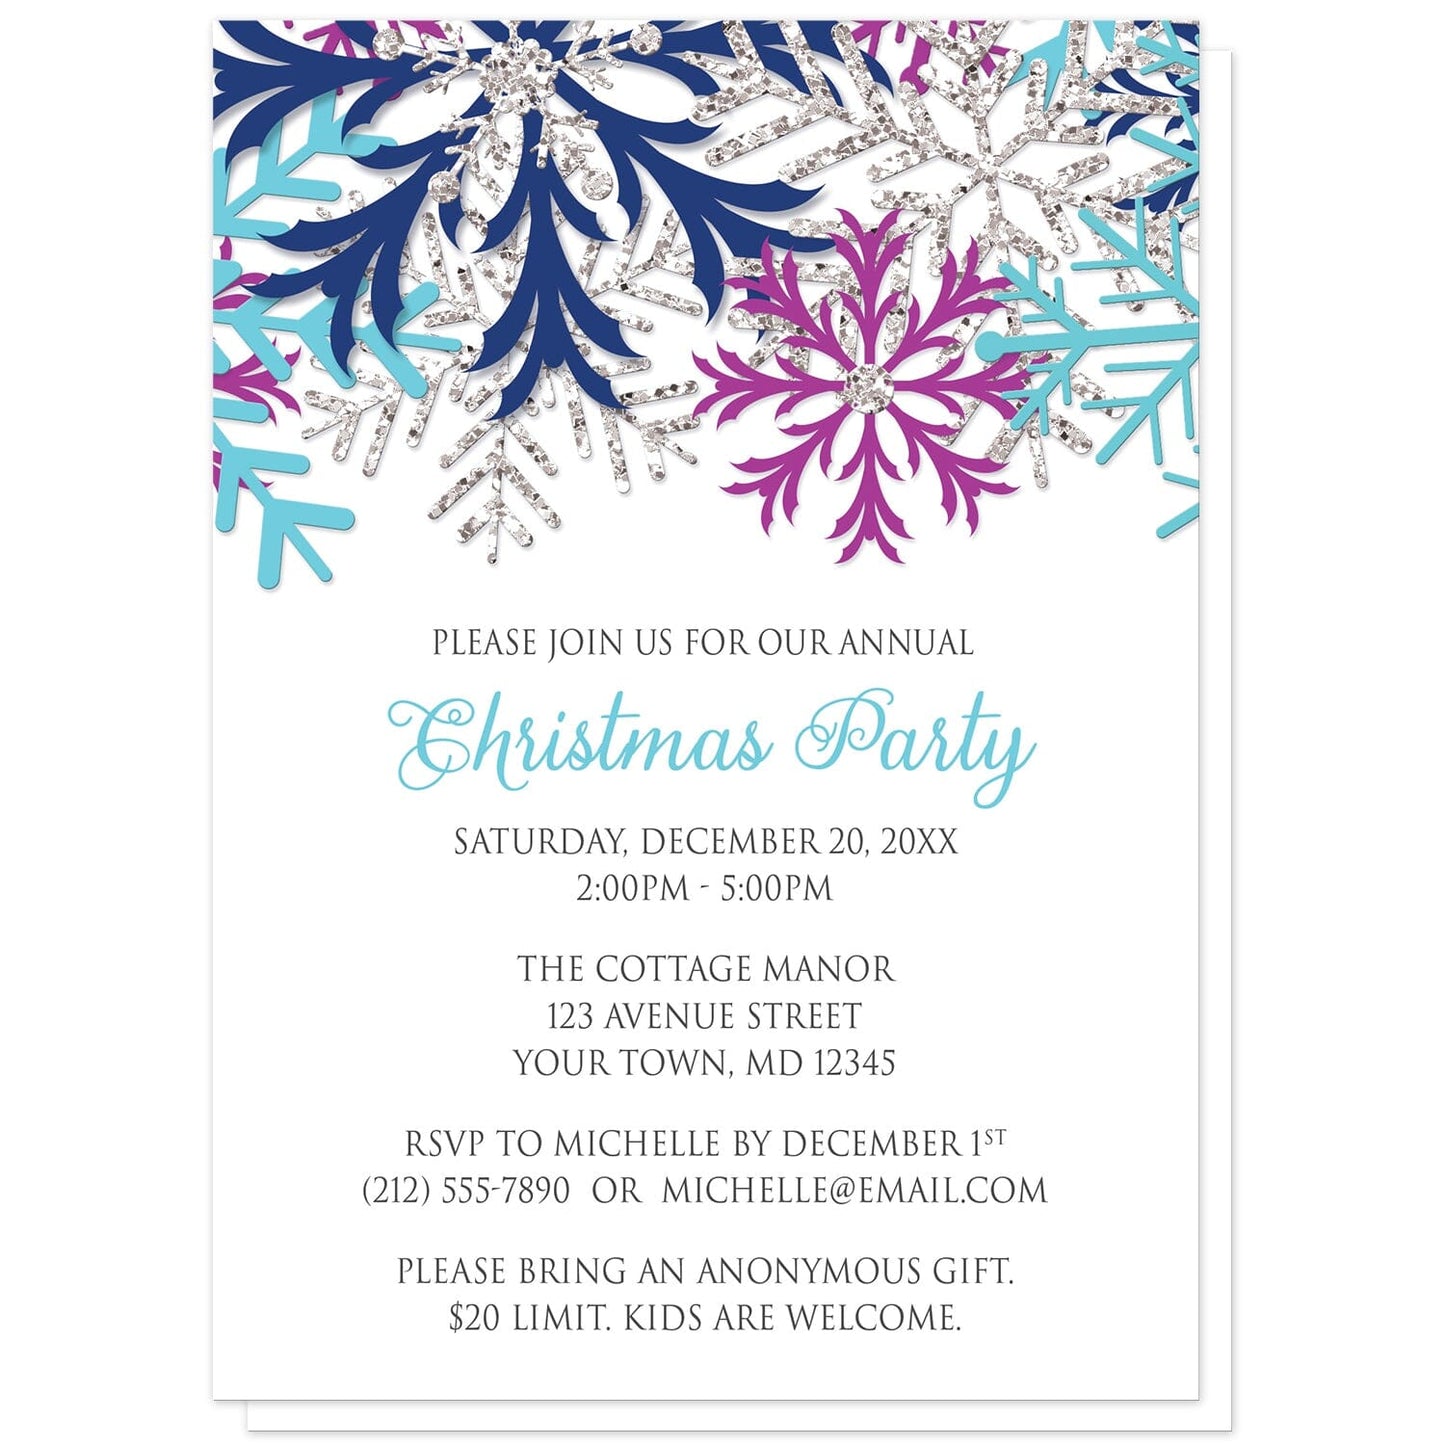 Turquoise Navy Orchid Silver Snowflake Christmas Invitations at Artistically Invited. Beautiful turquoise navy orchid silver snowflake Christmas invitations with turquoise blue, navy blue, orchid purple, and silver-colored glitter-illustrated snowflakes over a white background. Your personalized party details for your home or office party are custom printed in turquoise blue and gray over white below the pretty snowflakes. 